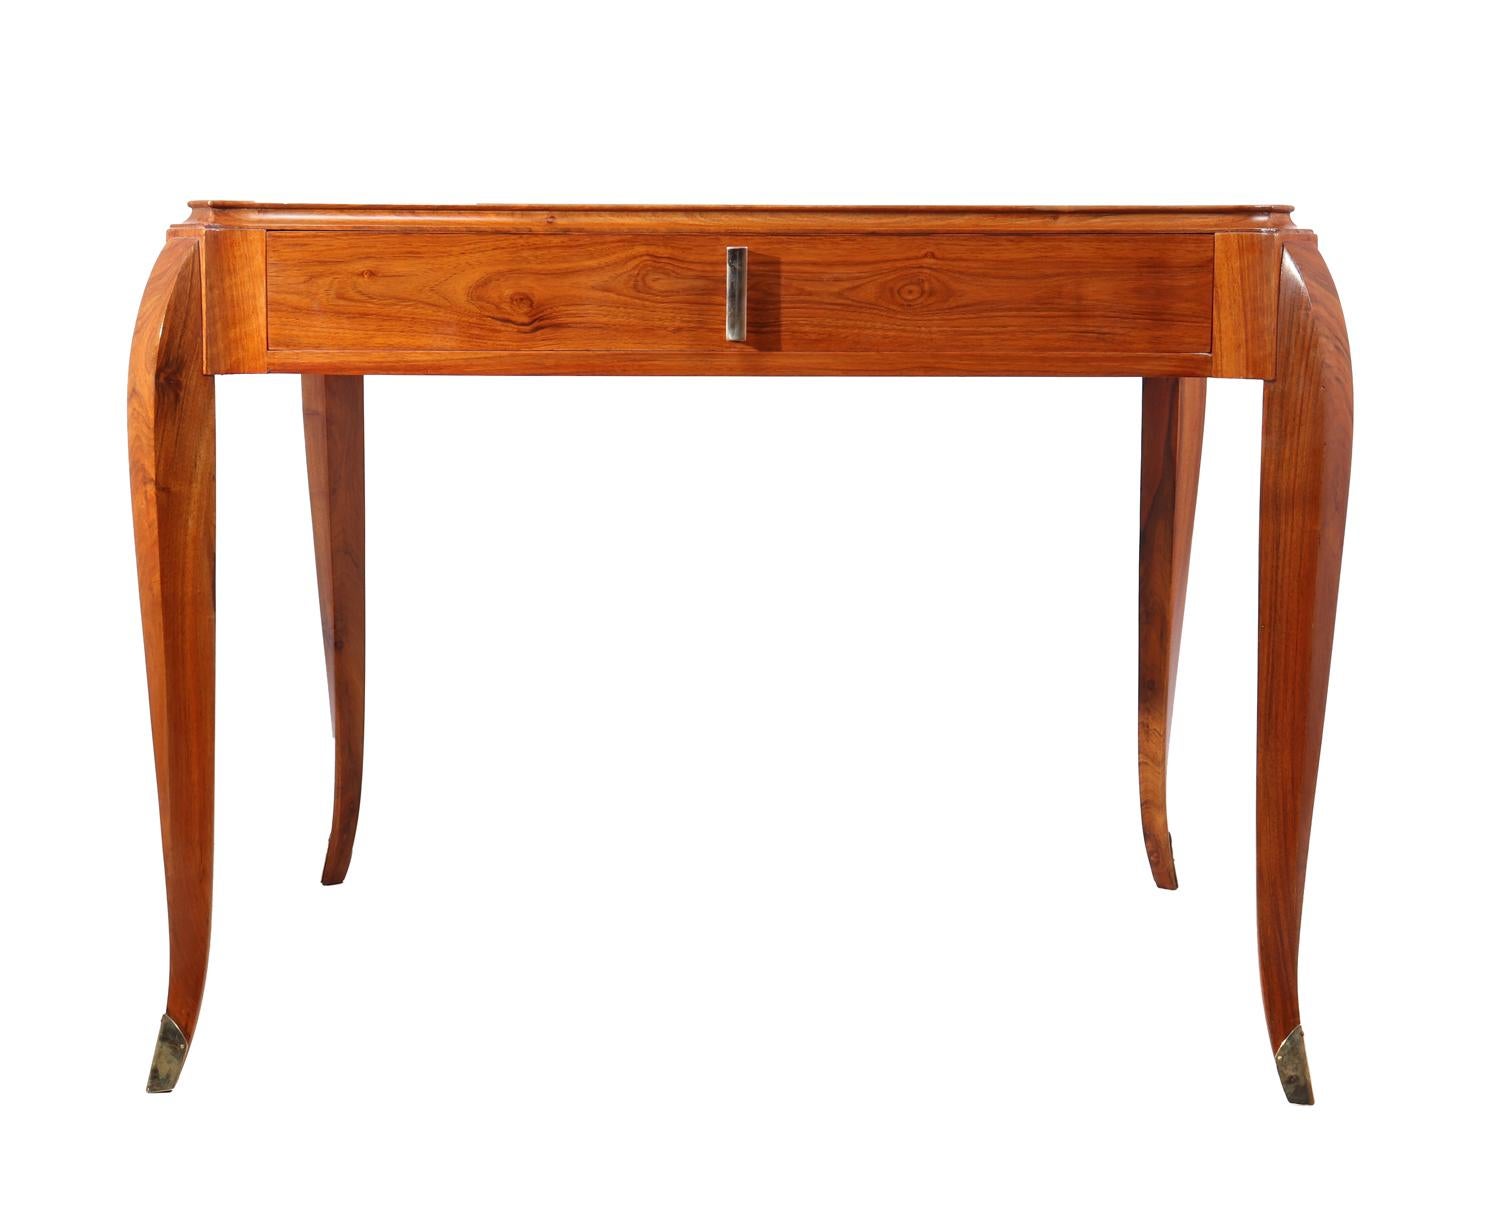 Art Deco walnut writing table.
A single drawer French walnut writing table, solid brass handle and feet tips, the desk has been fully restored and hand polished.

Age: 1930

Style: Art Deco

Material: Walnut

Origin: France

Condition: